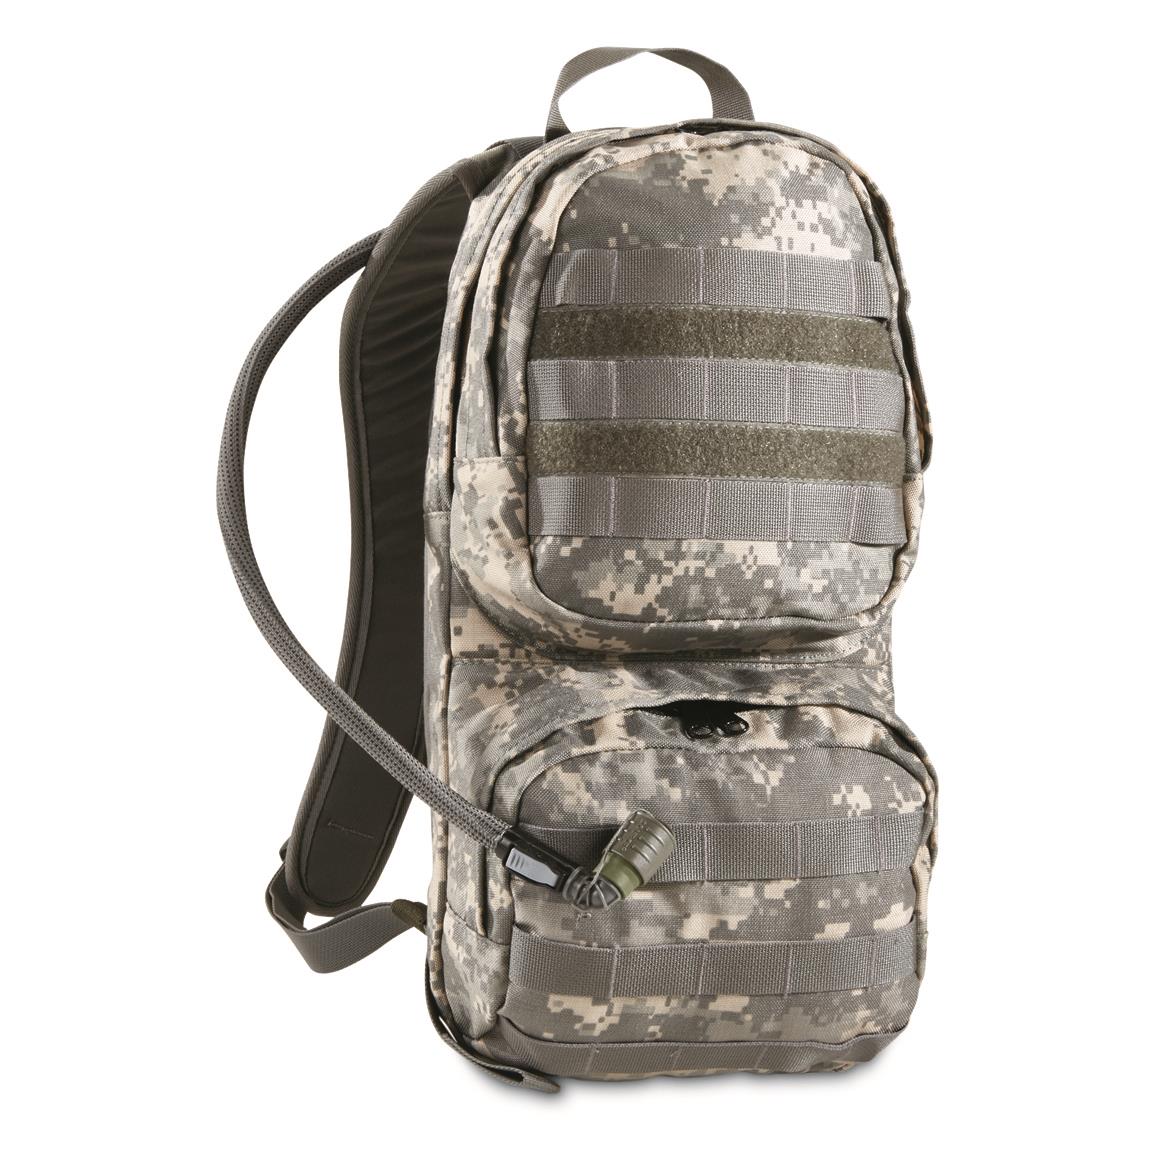 Paintball 3L Air Tank Carrier Pouch Backpack Bag Adjustable drawstring Outdoor 